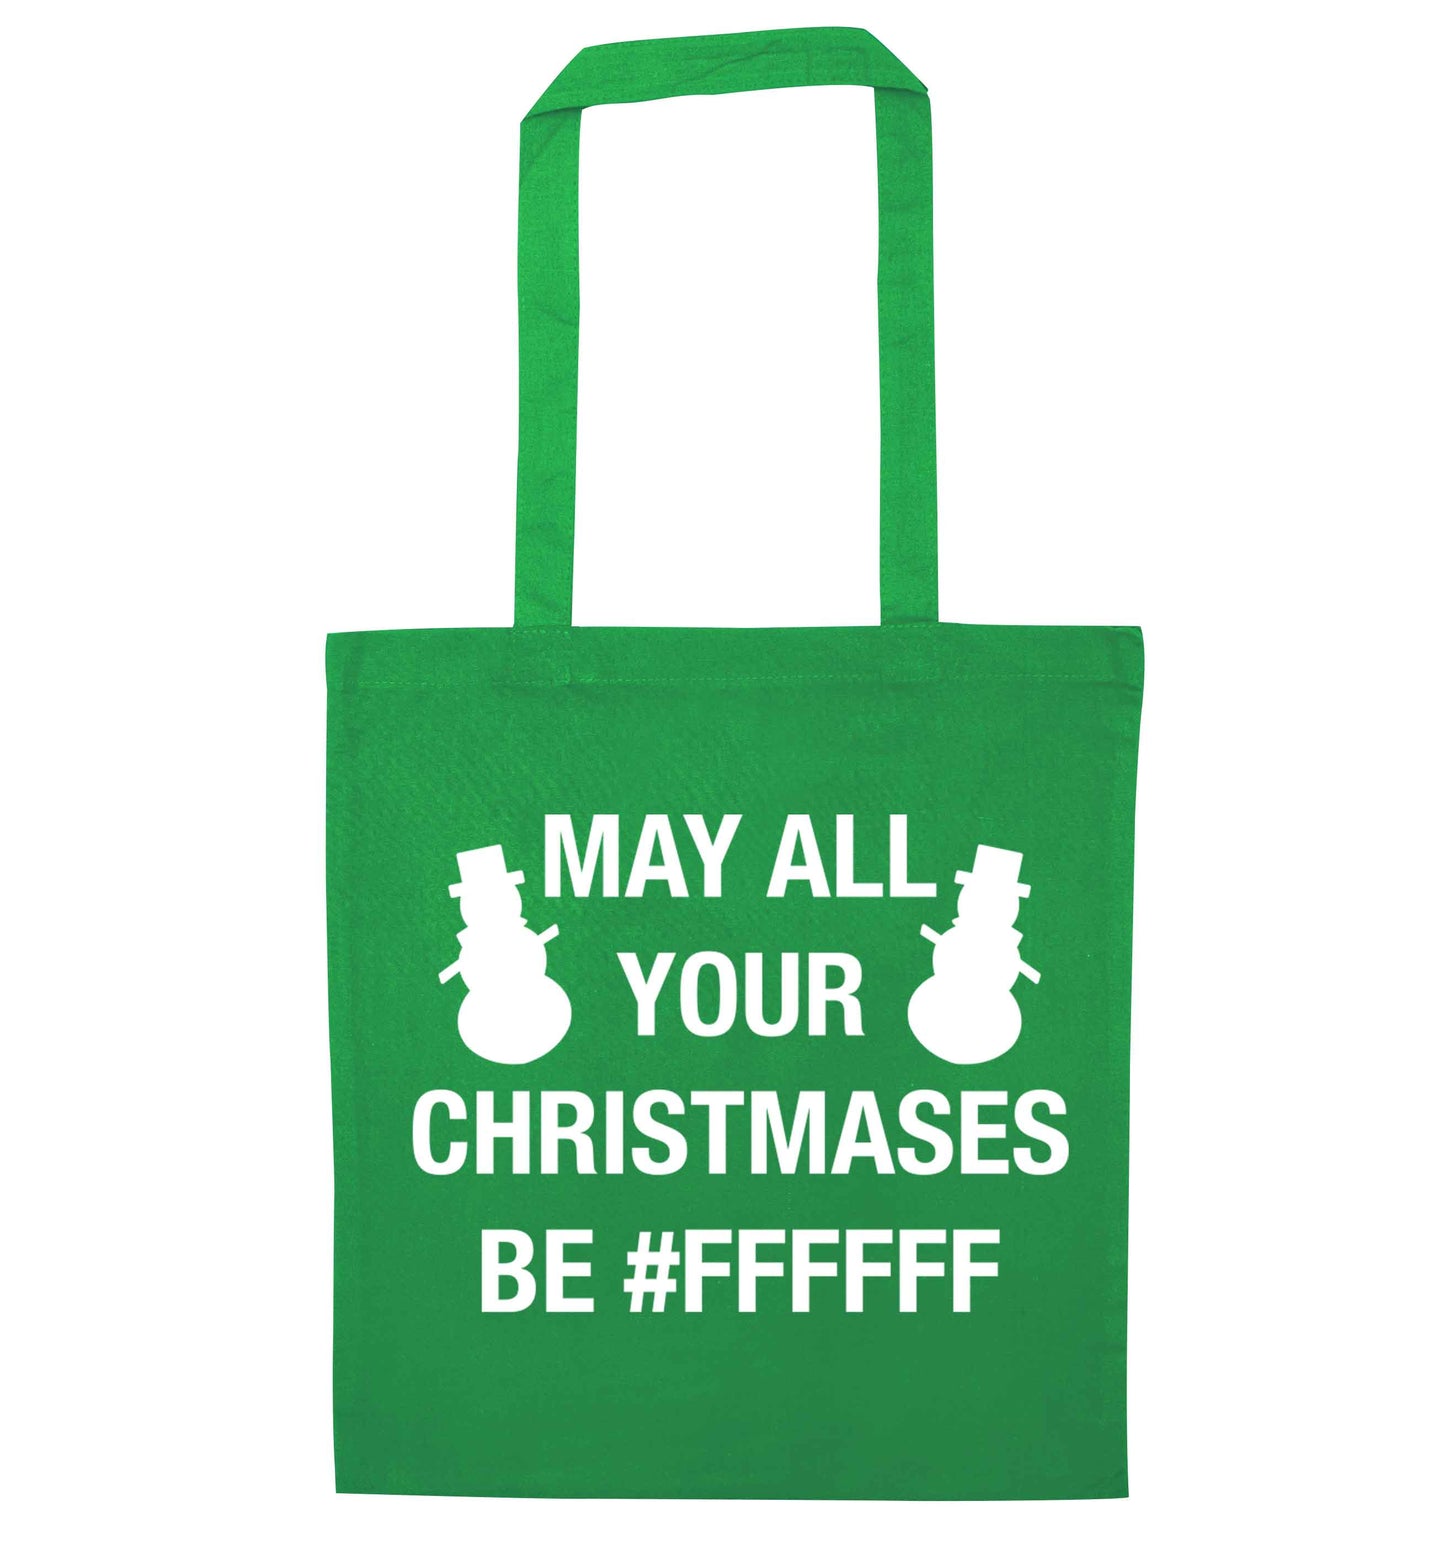 May all your Christmases be #FFFFFF green tote bag